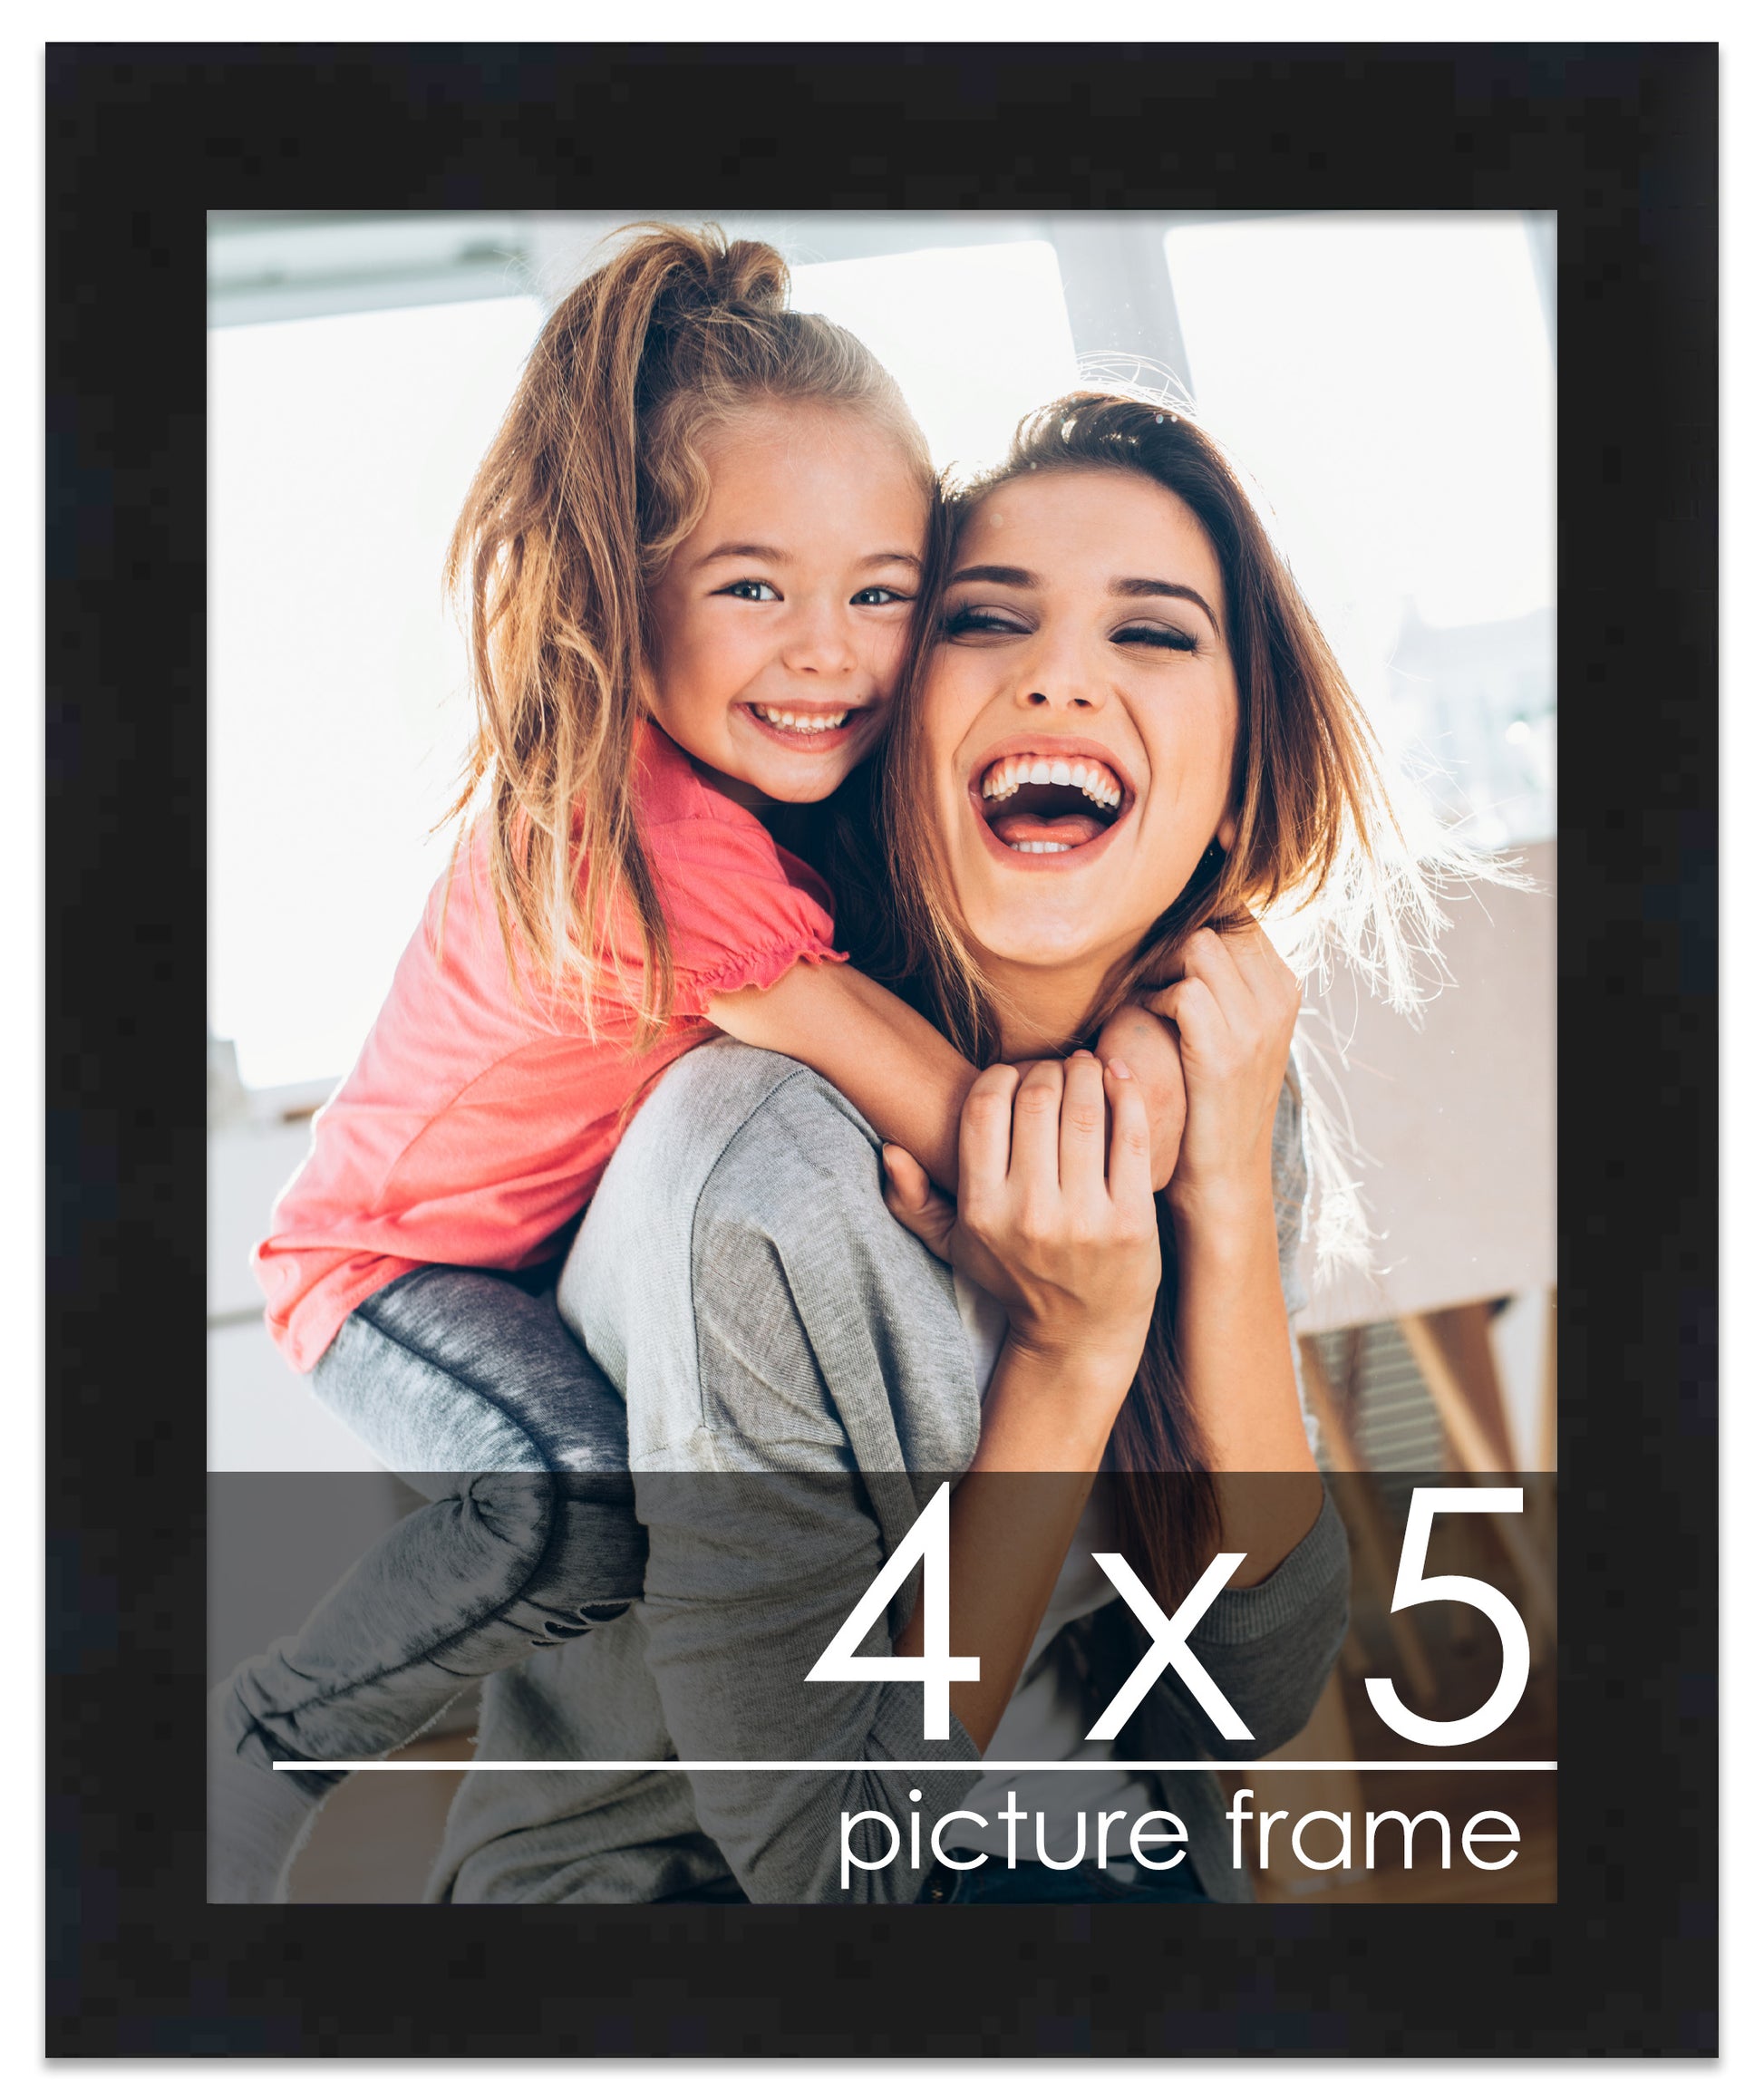 4x5 Picture Frame Black Solid Pine Wood 0.75 Inch Wide